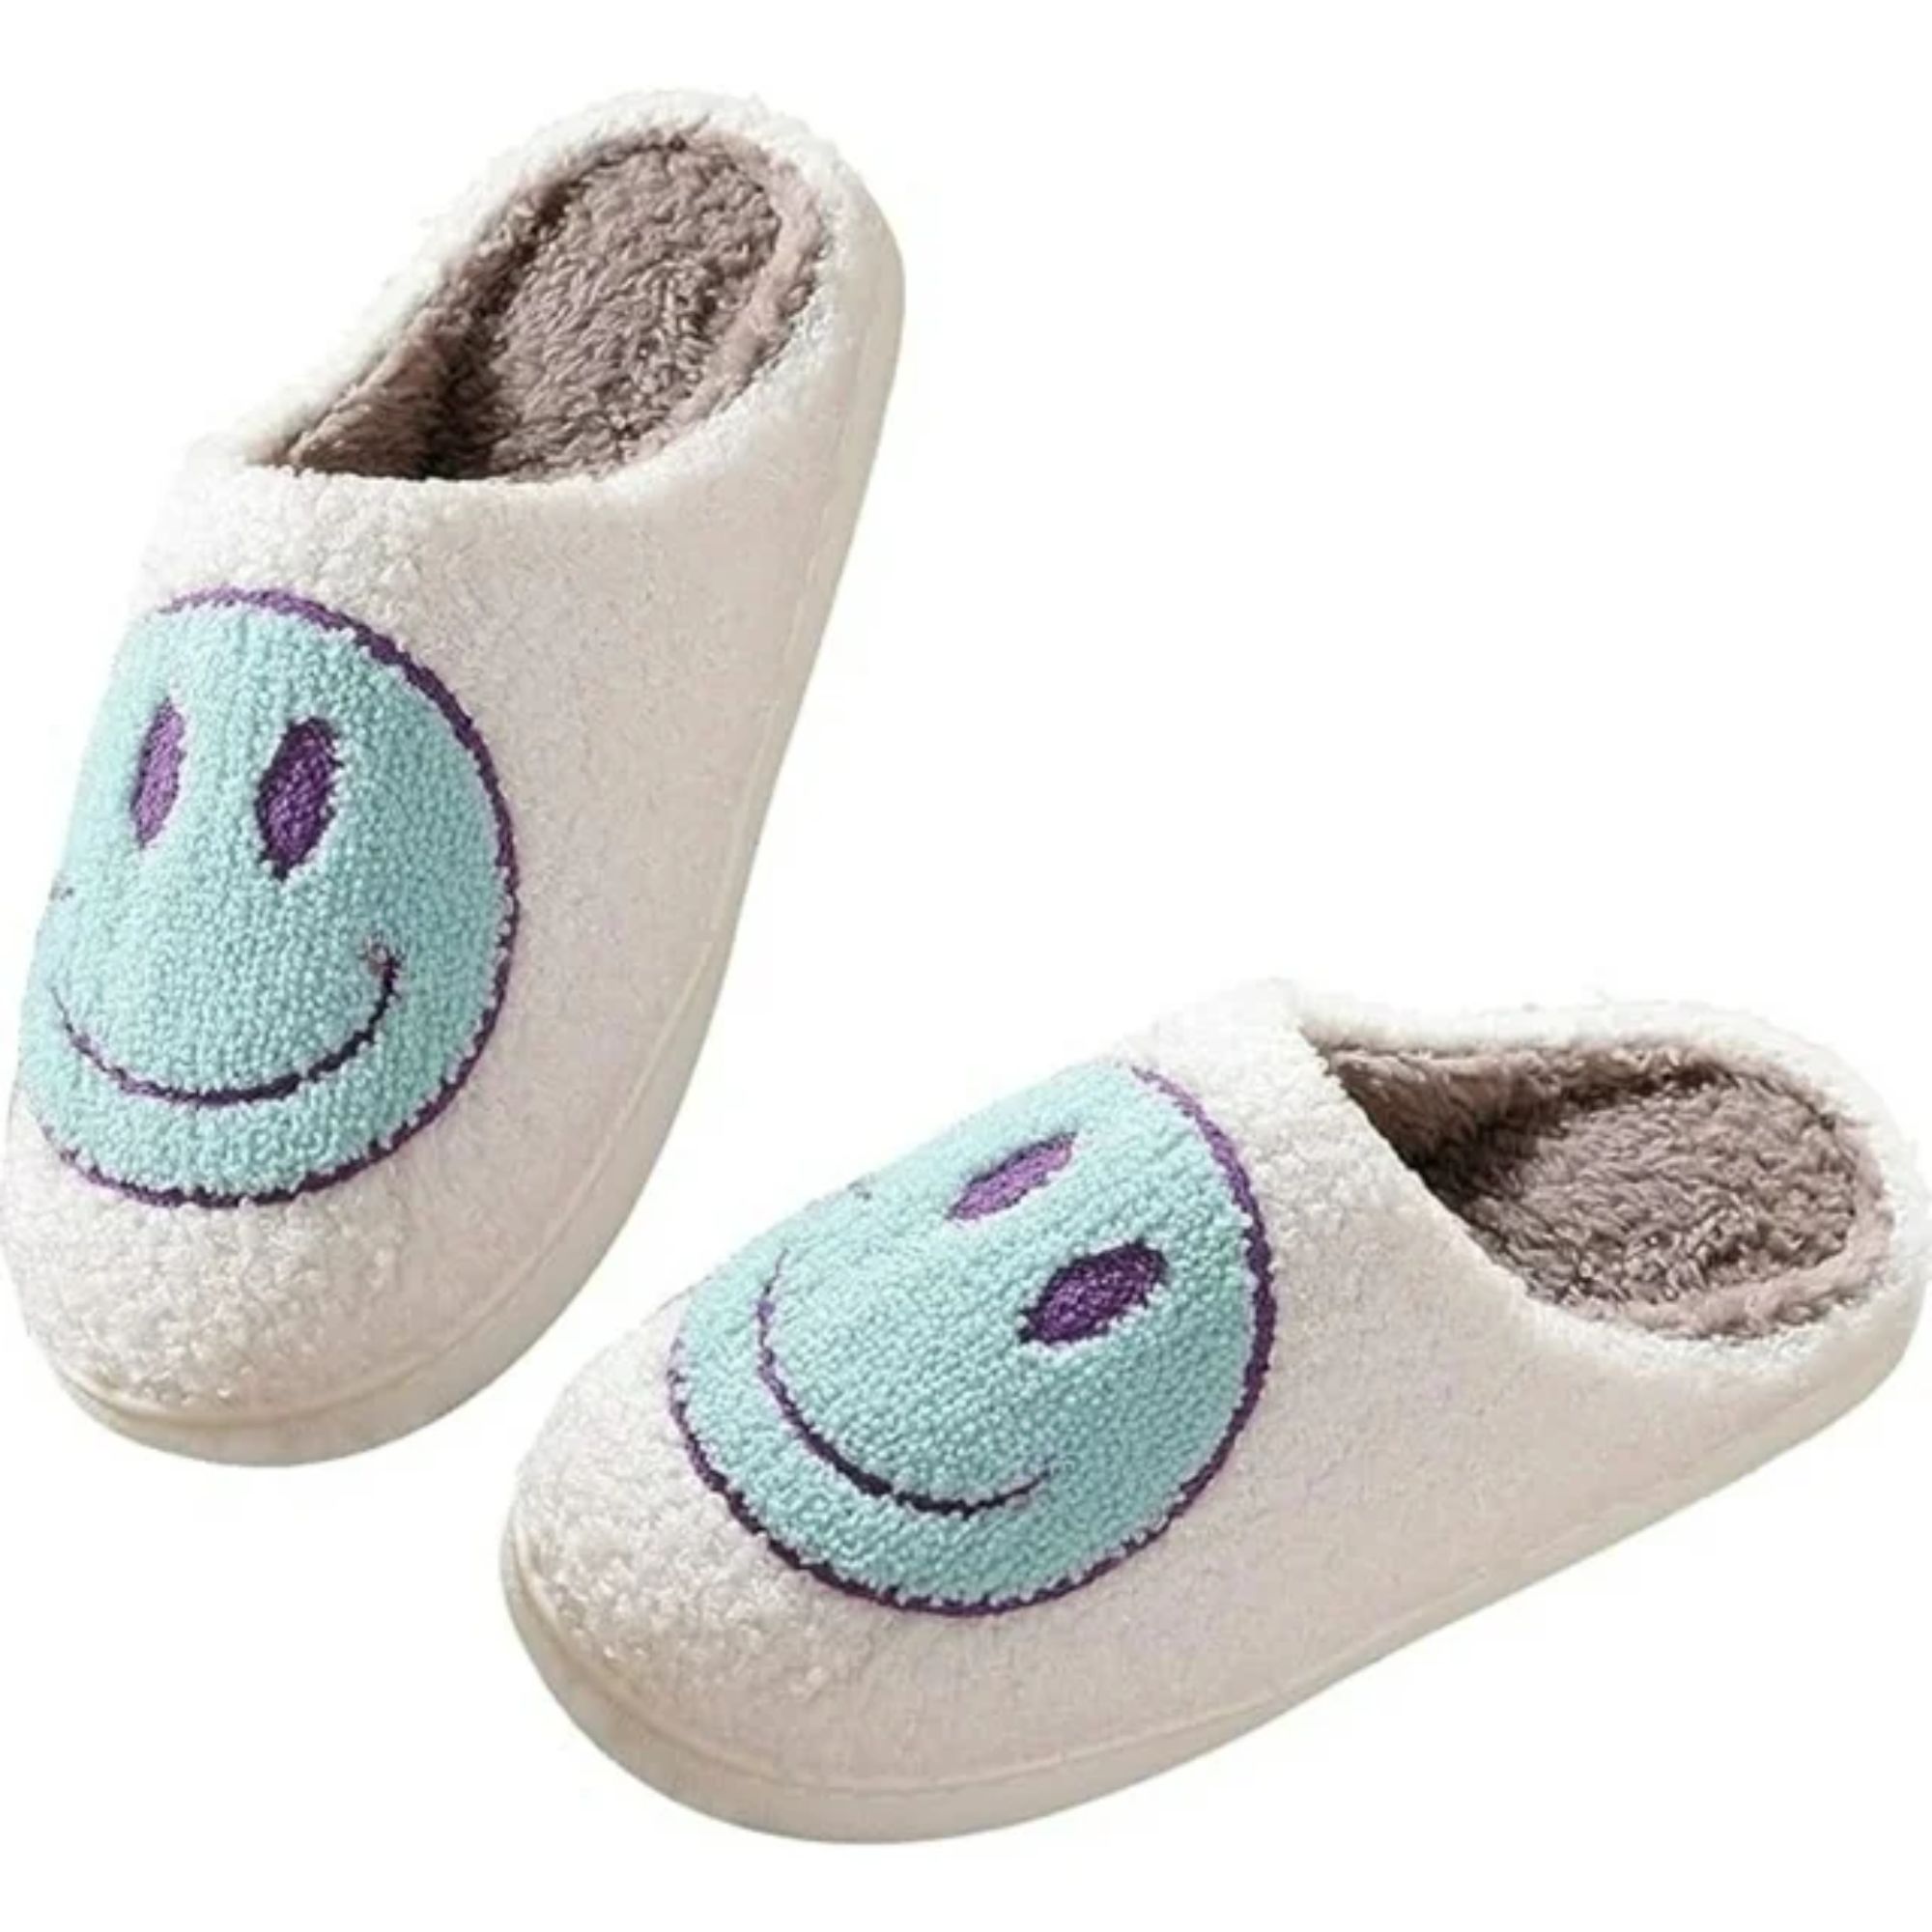 BERANMEY Cute Smile Face Slippers for Women Perfect Soft Plush Comfy Warm Slip-On Happy Face Slippers fo Women Indoor fluffy Smile House Slippers for Women and Men Non-slip Fuzzy Flat Slides - image 4 of 8